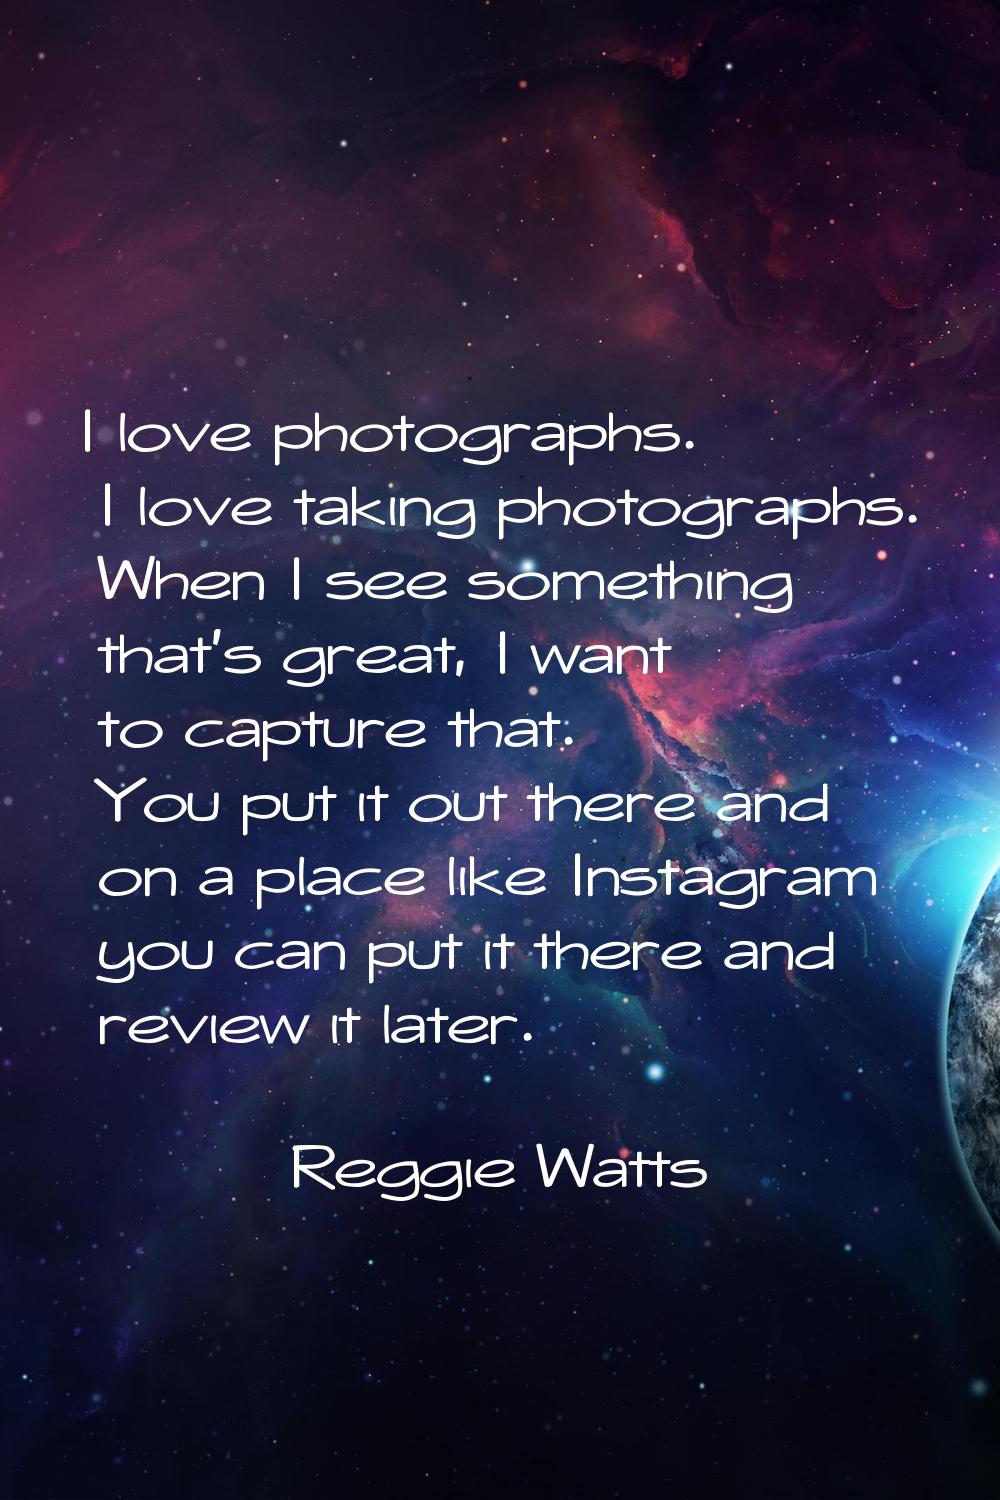 I love photographs. I love taking photographs. When I see something that's great, I want to capture